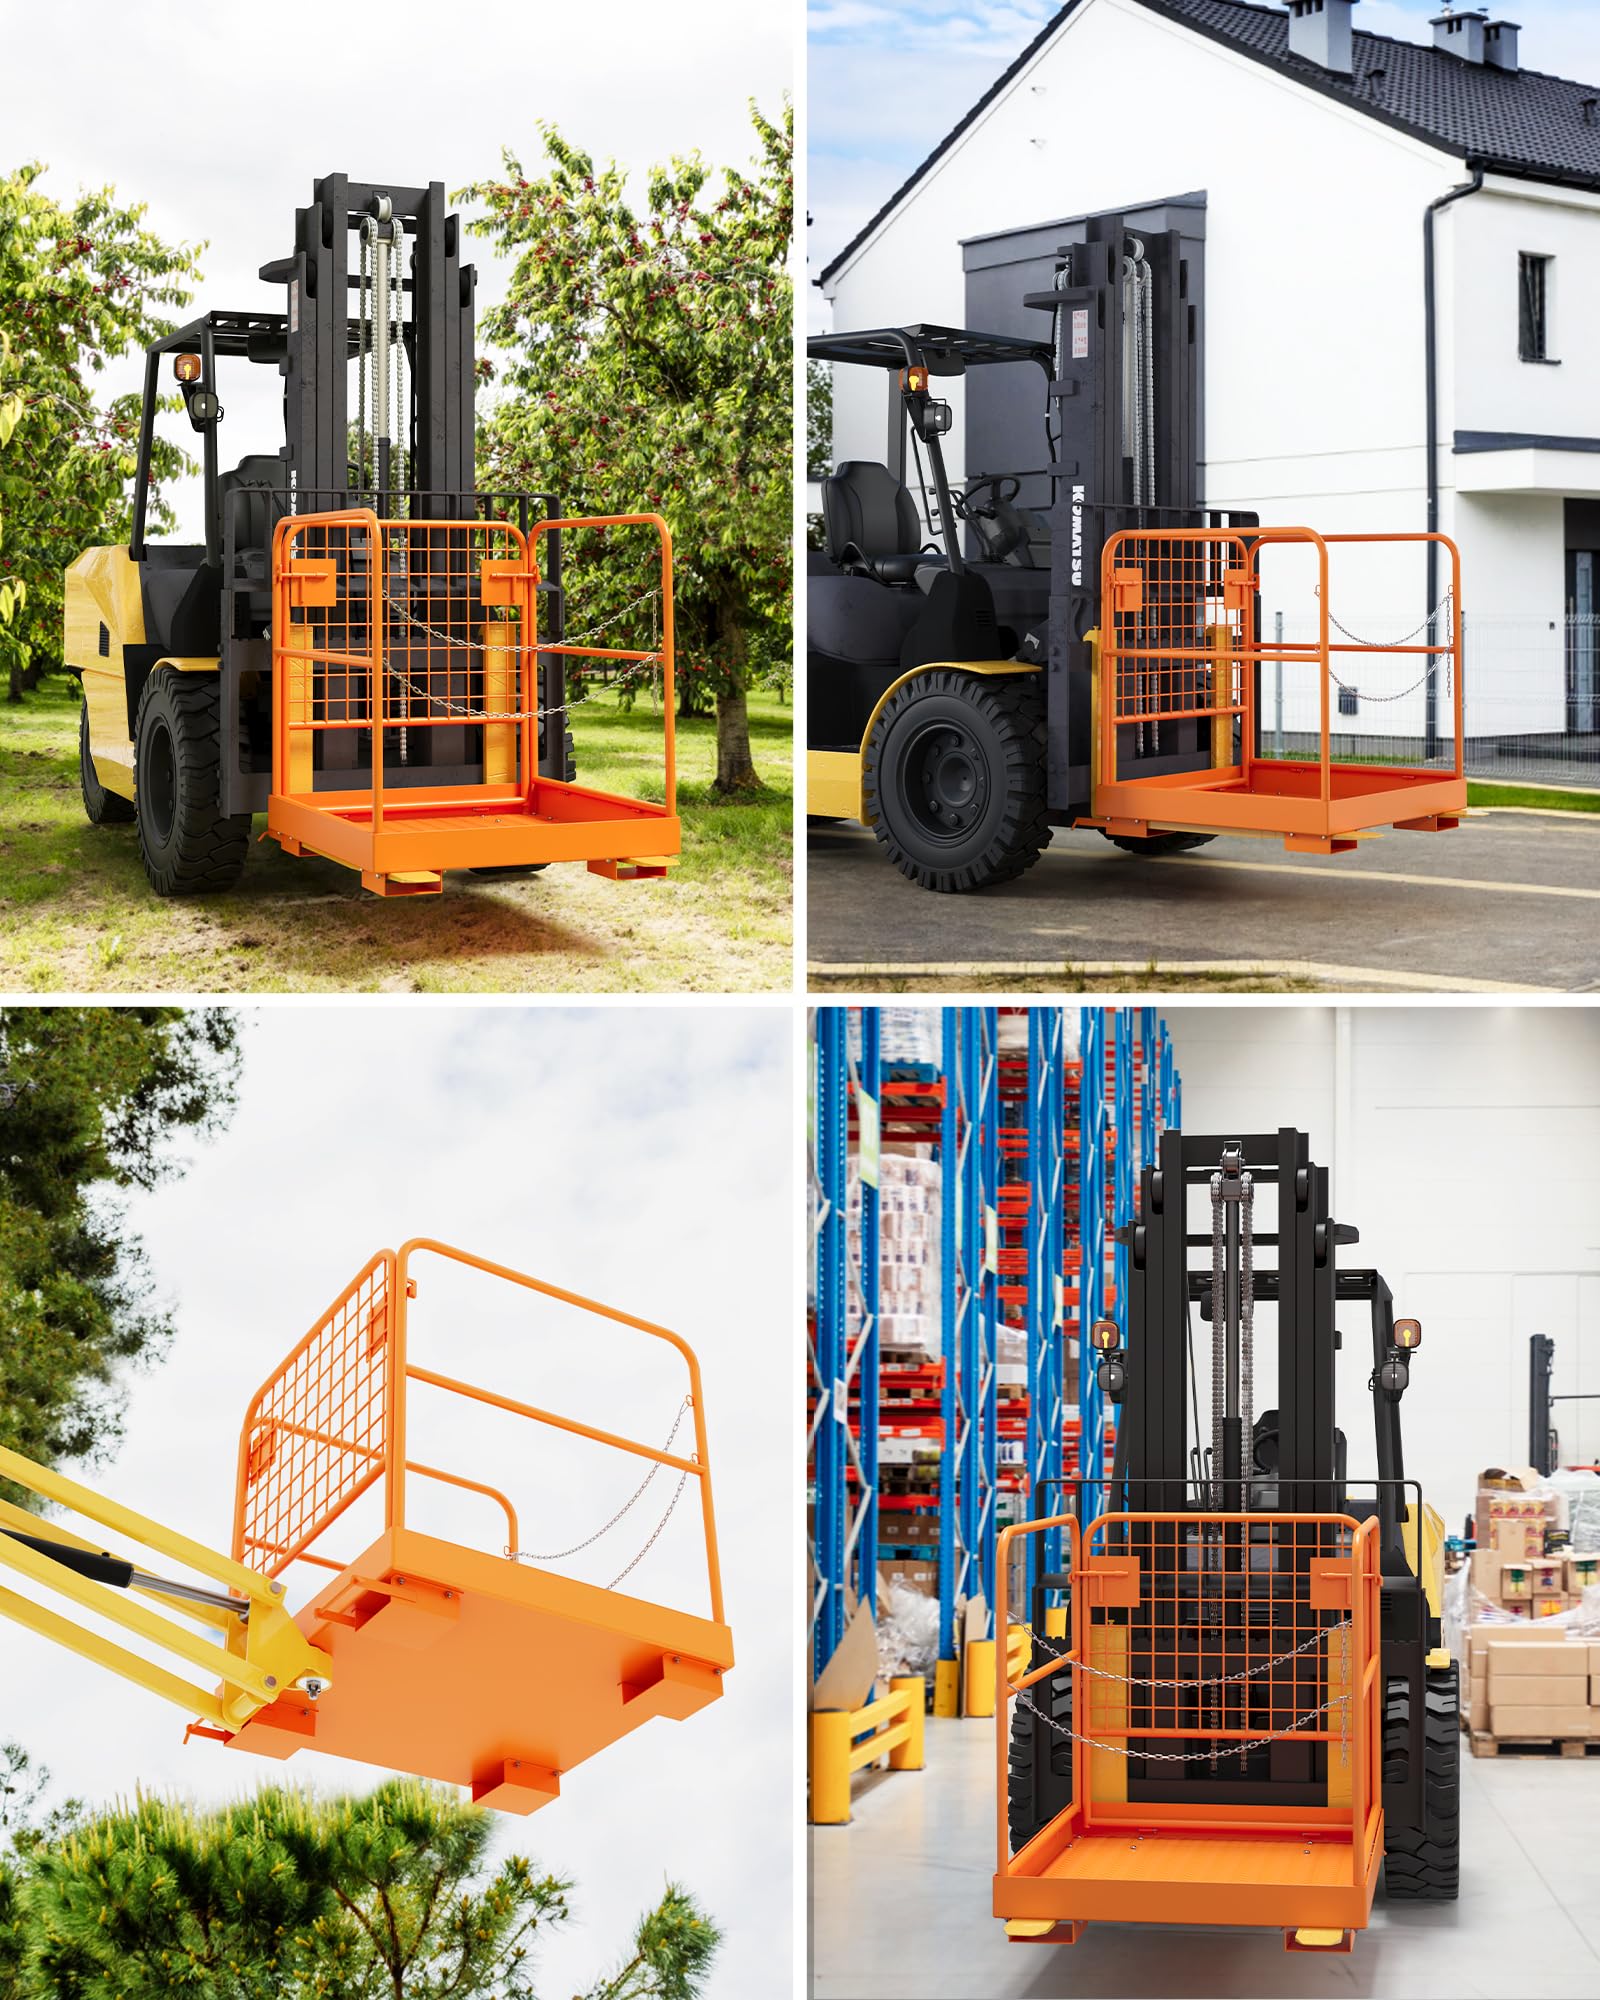 36x36 Inch Forklift Safety Cage, 1200LBS Load, 1-3 People